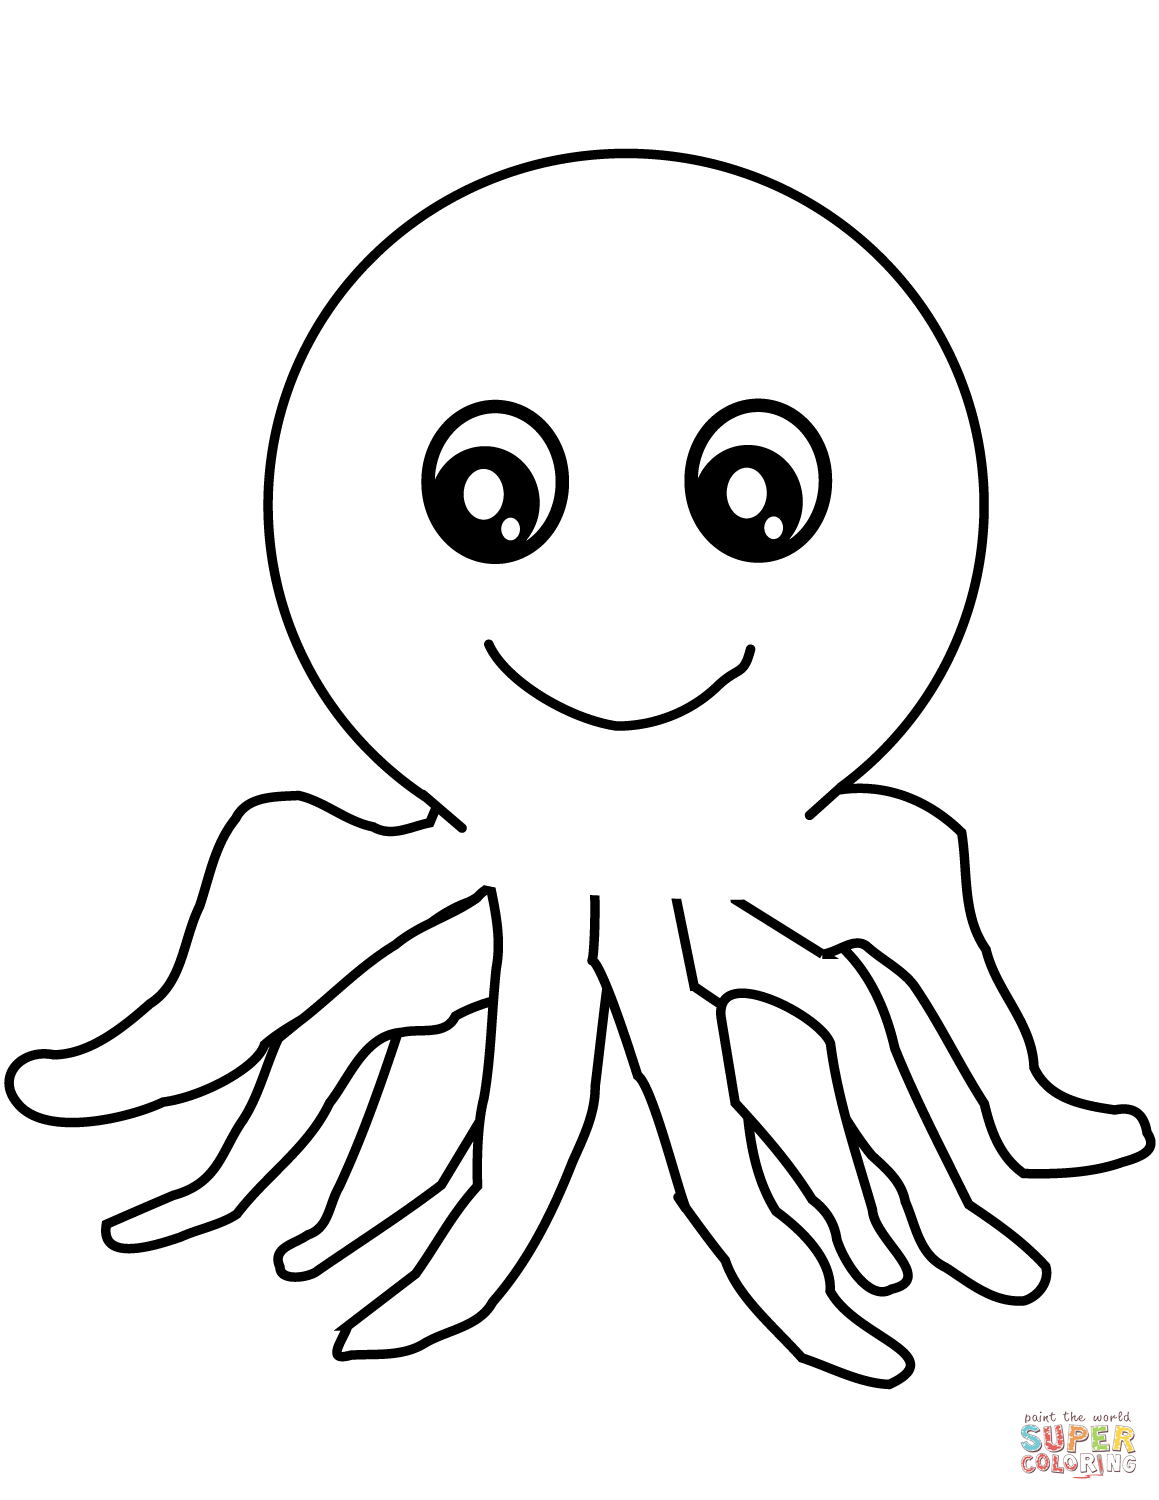 Cartoon octopus coloring page free printable coloring pages